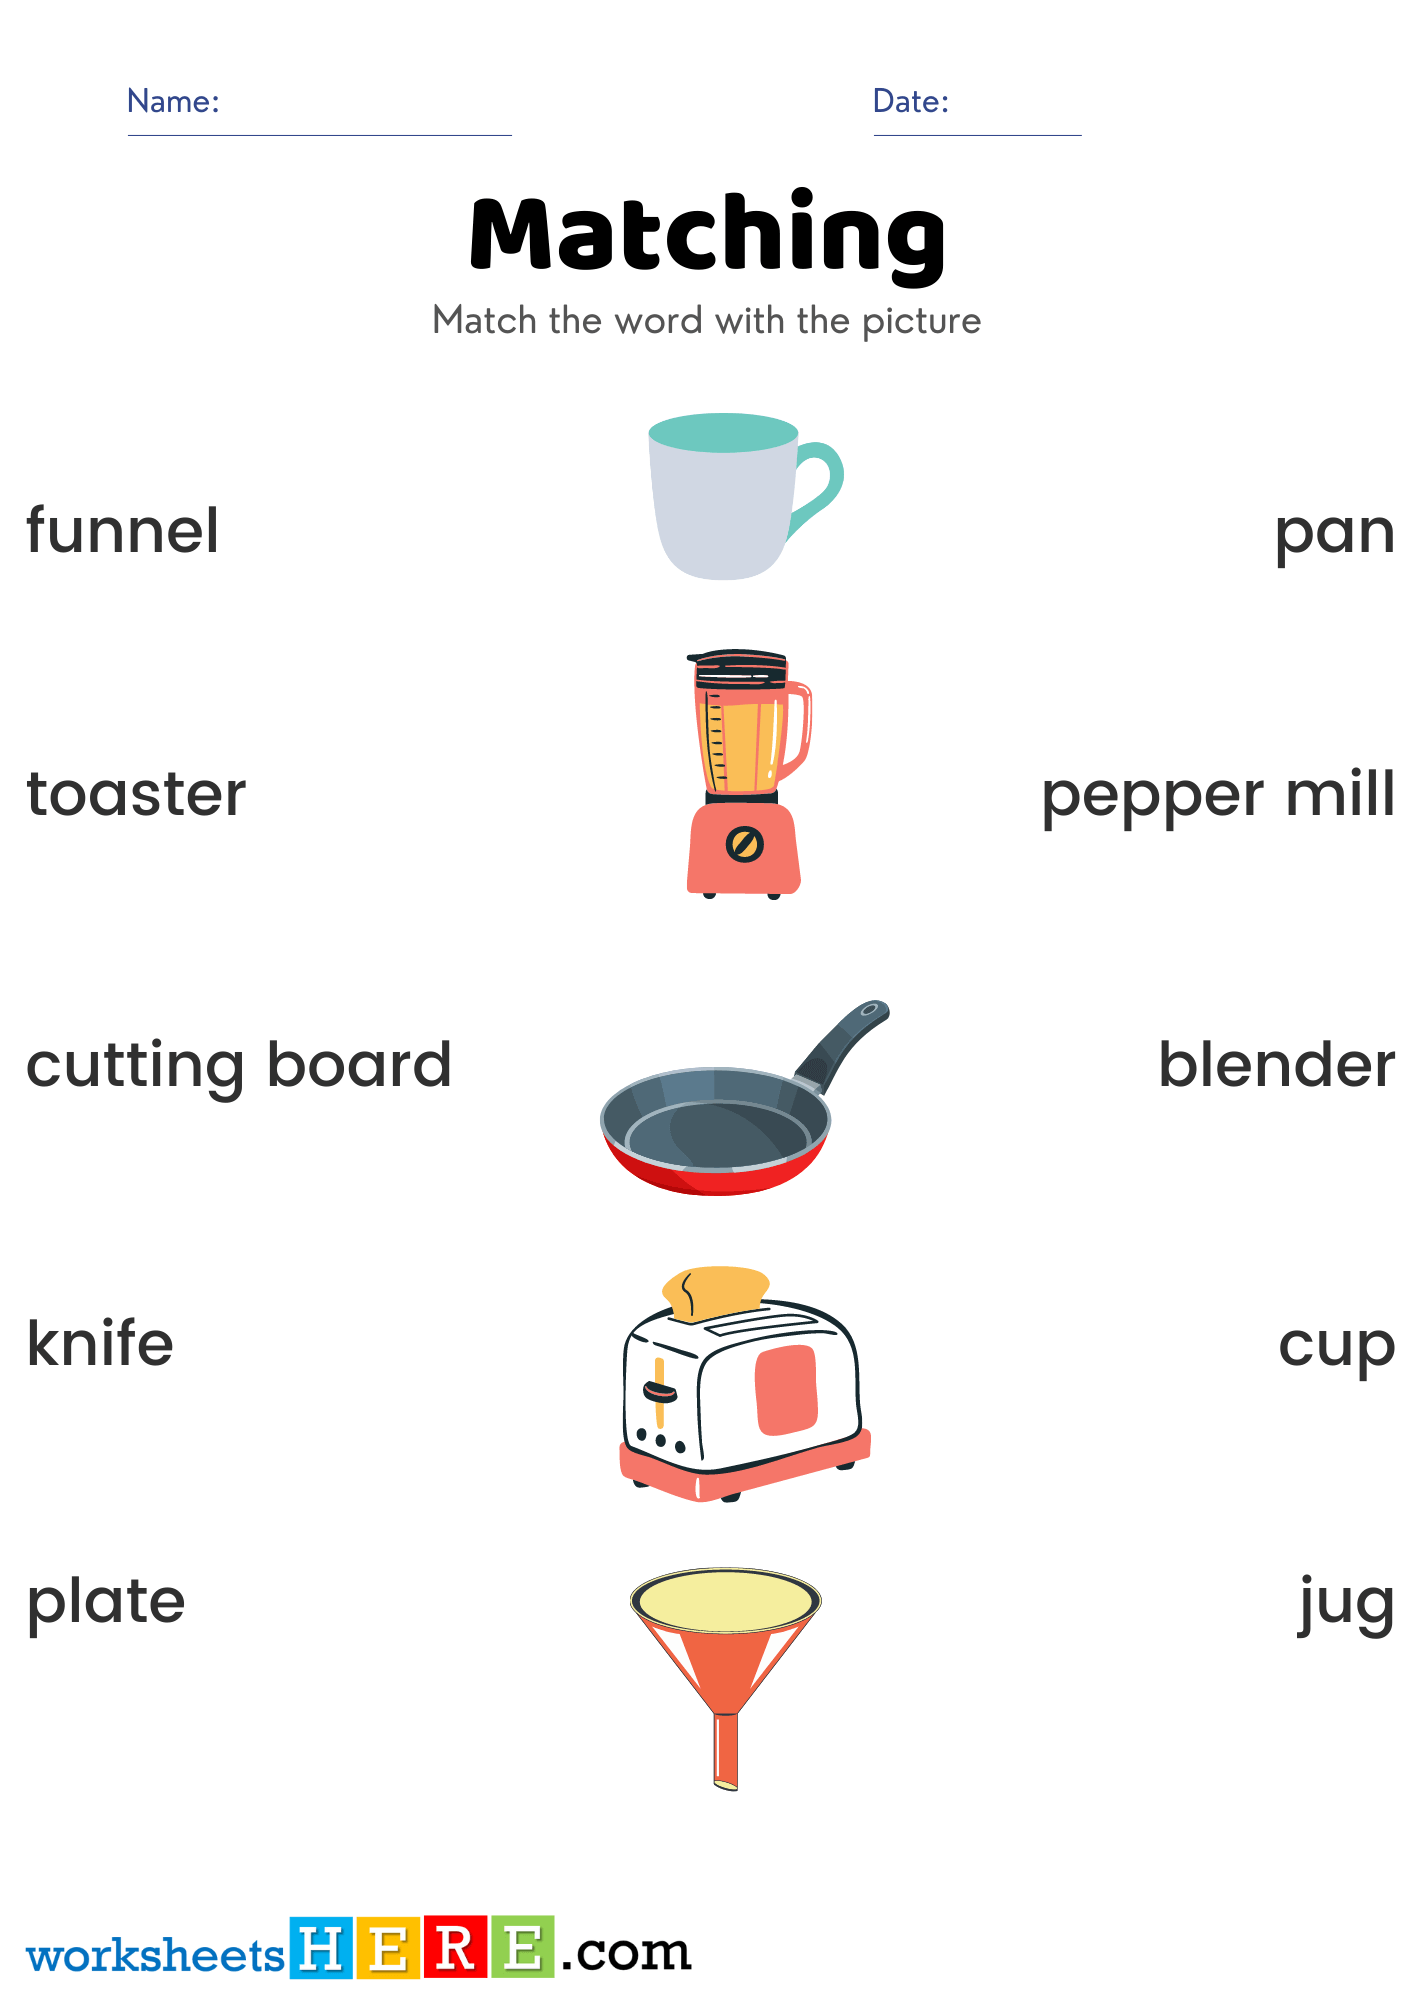 Match Kitchen Tools Names Pictures and Names Activity PDF Worksheets For Kids